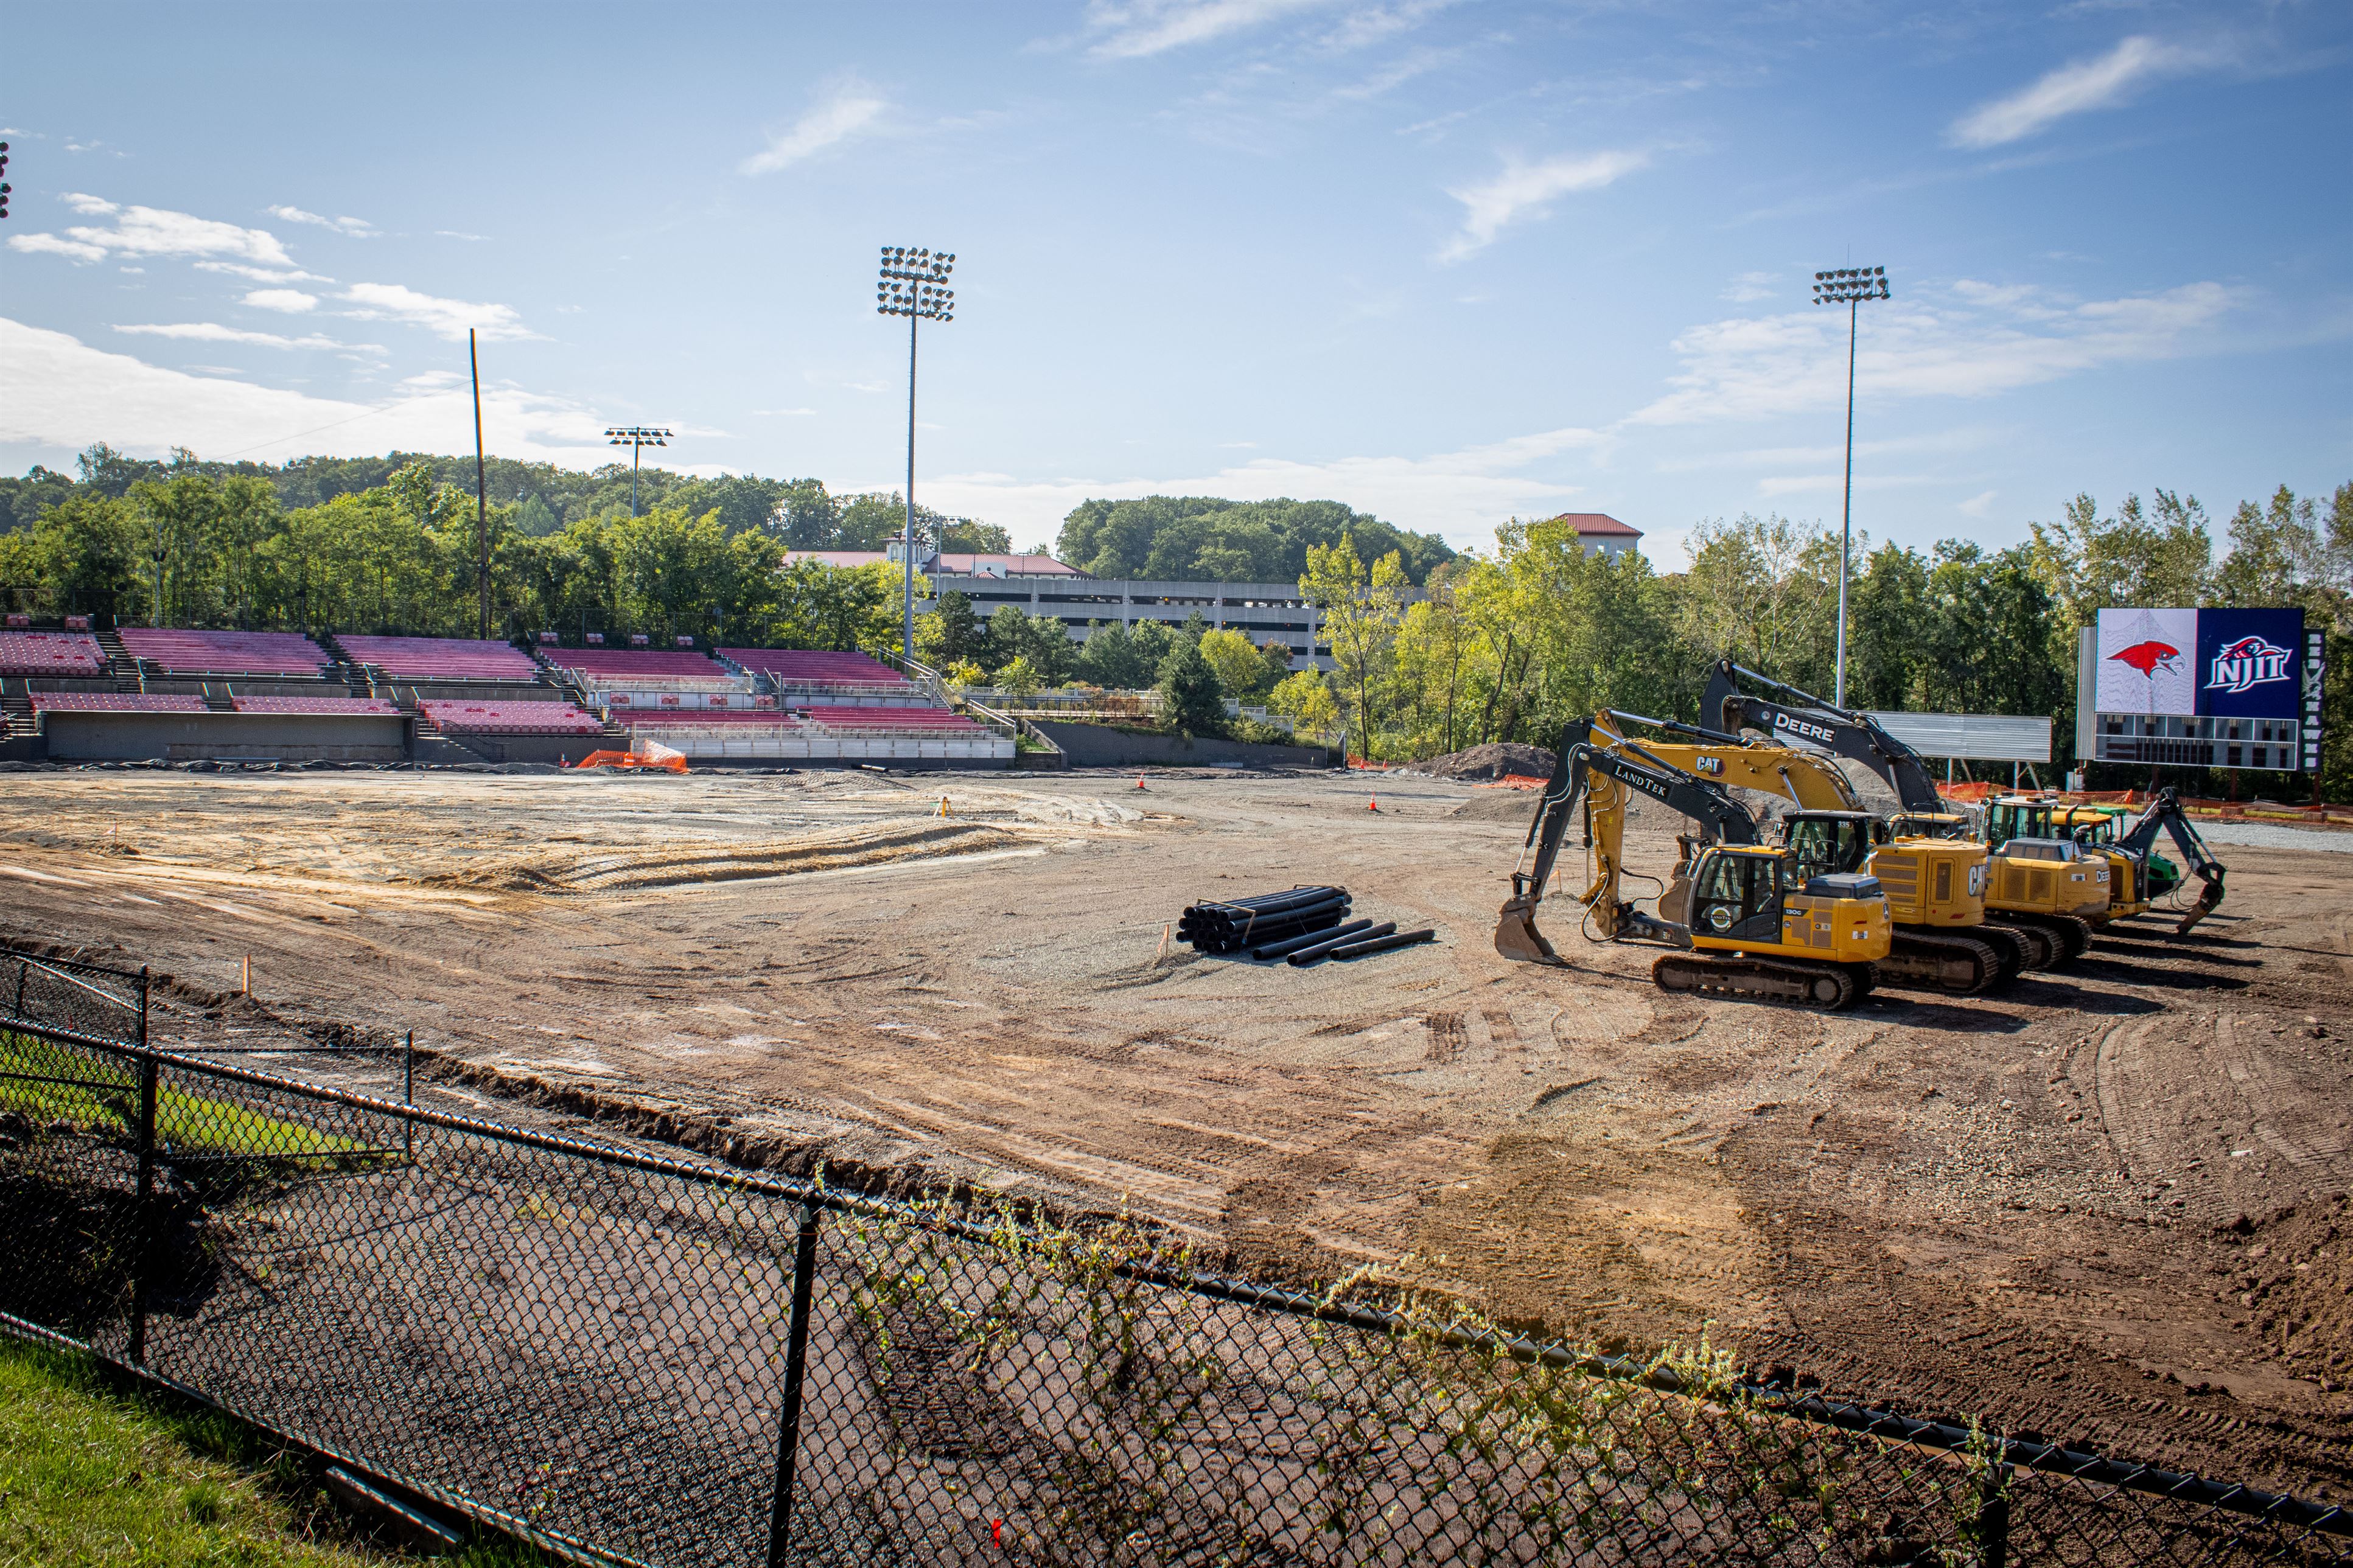 The dug up grass at Yogi Berra Stadium is to be transformed to a turf playing field.